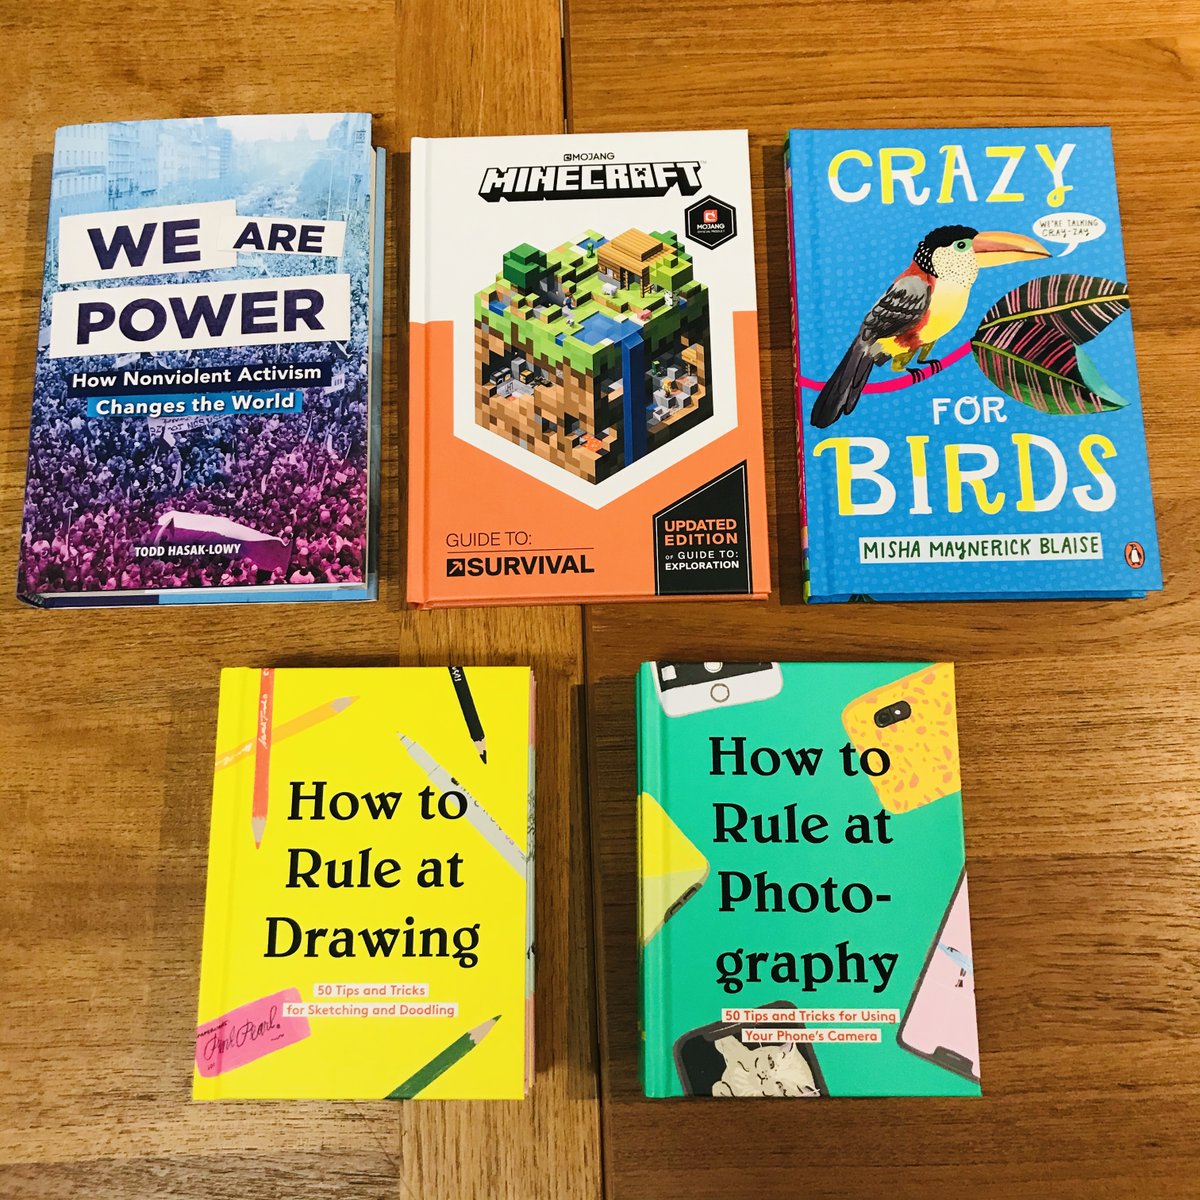 Nonfiction!WE ARE POWER: HOW NONVIOLENT ACTIVISM CHANGES THE WORLD by Todd Hasak-Lowy!MINECRAFT: GUIDE TO SURVIVAL!CRAZY FOR BIRDS by Misha Maynerick Blaise!HOW TO RULE AT DRAWING and HOW TO RULE AT PHOTOGRAPHY!